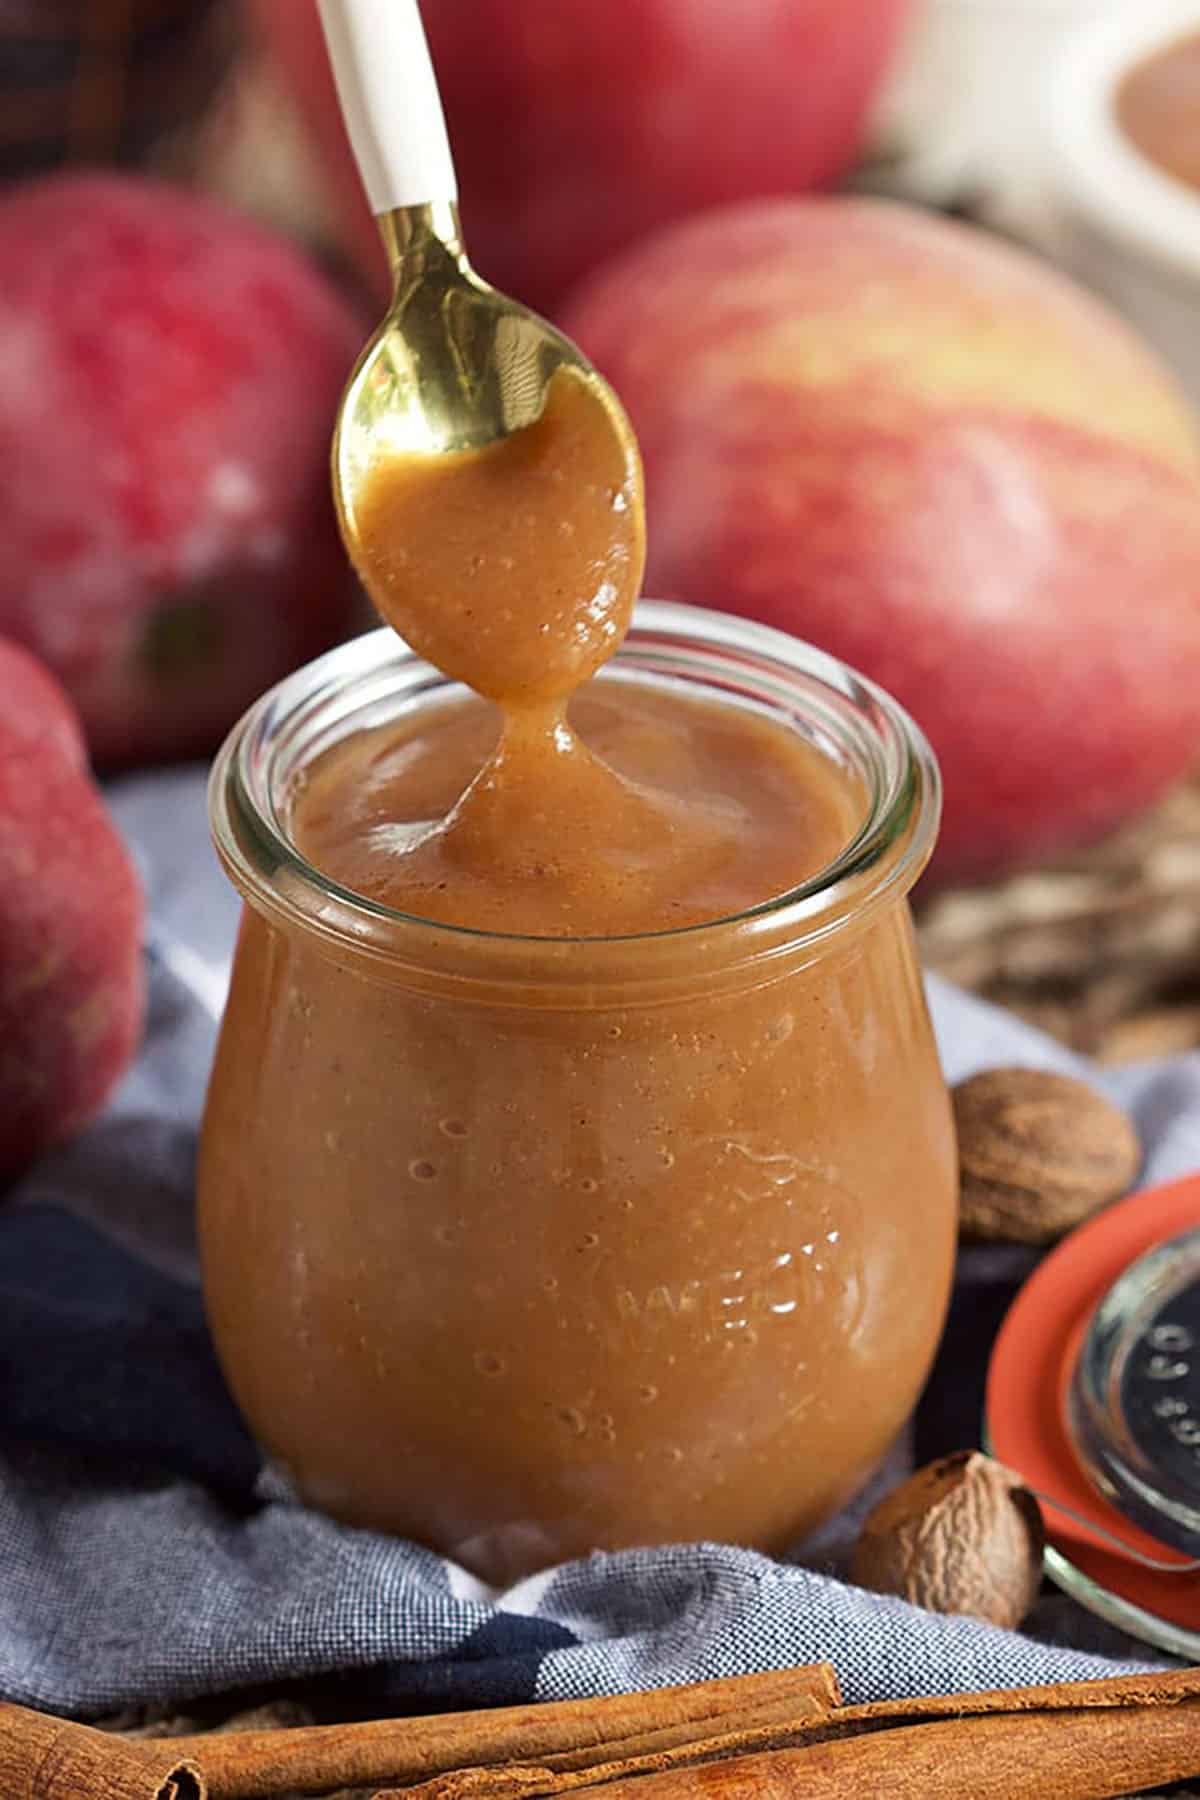 Apple butter in a weck tulip jar with a spoon and apples in the background.